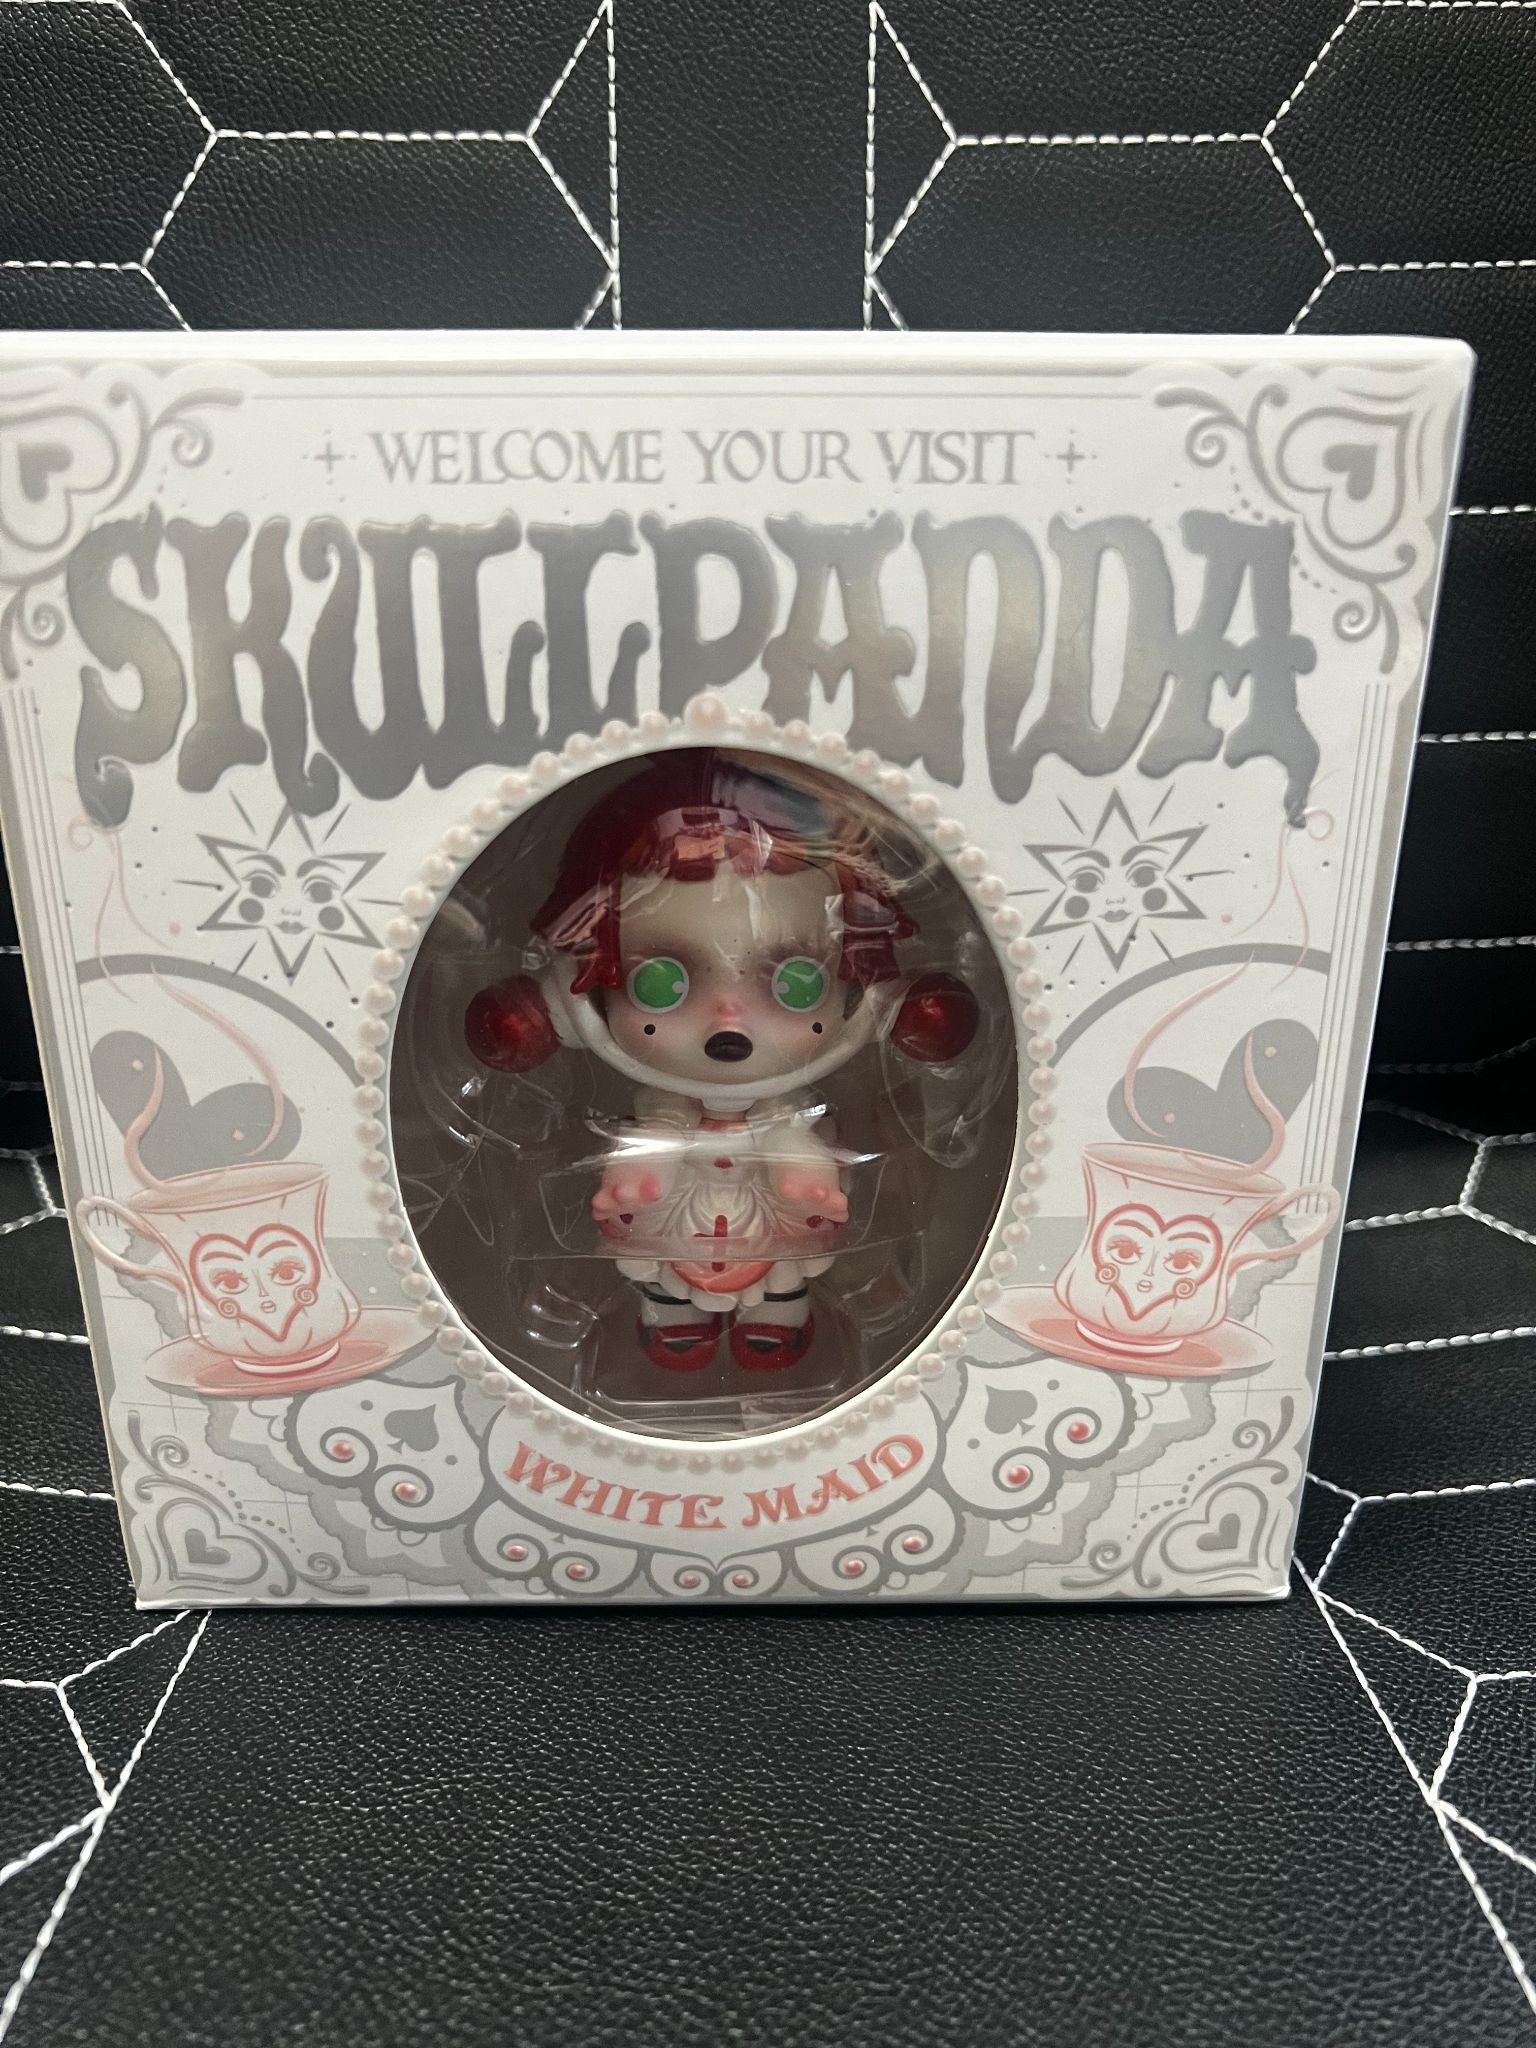 White Maid + Welcome Your Visit Limited Edition - Skullpanda - Pop Mart - 1